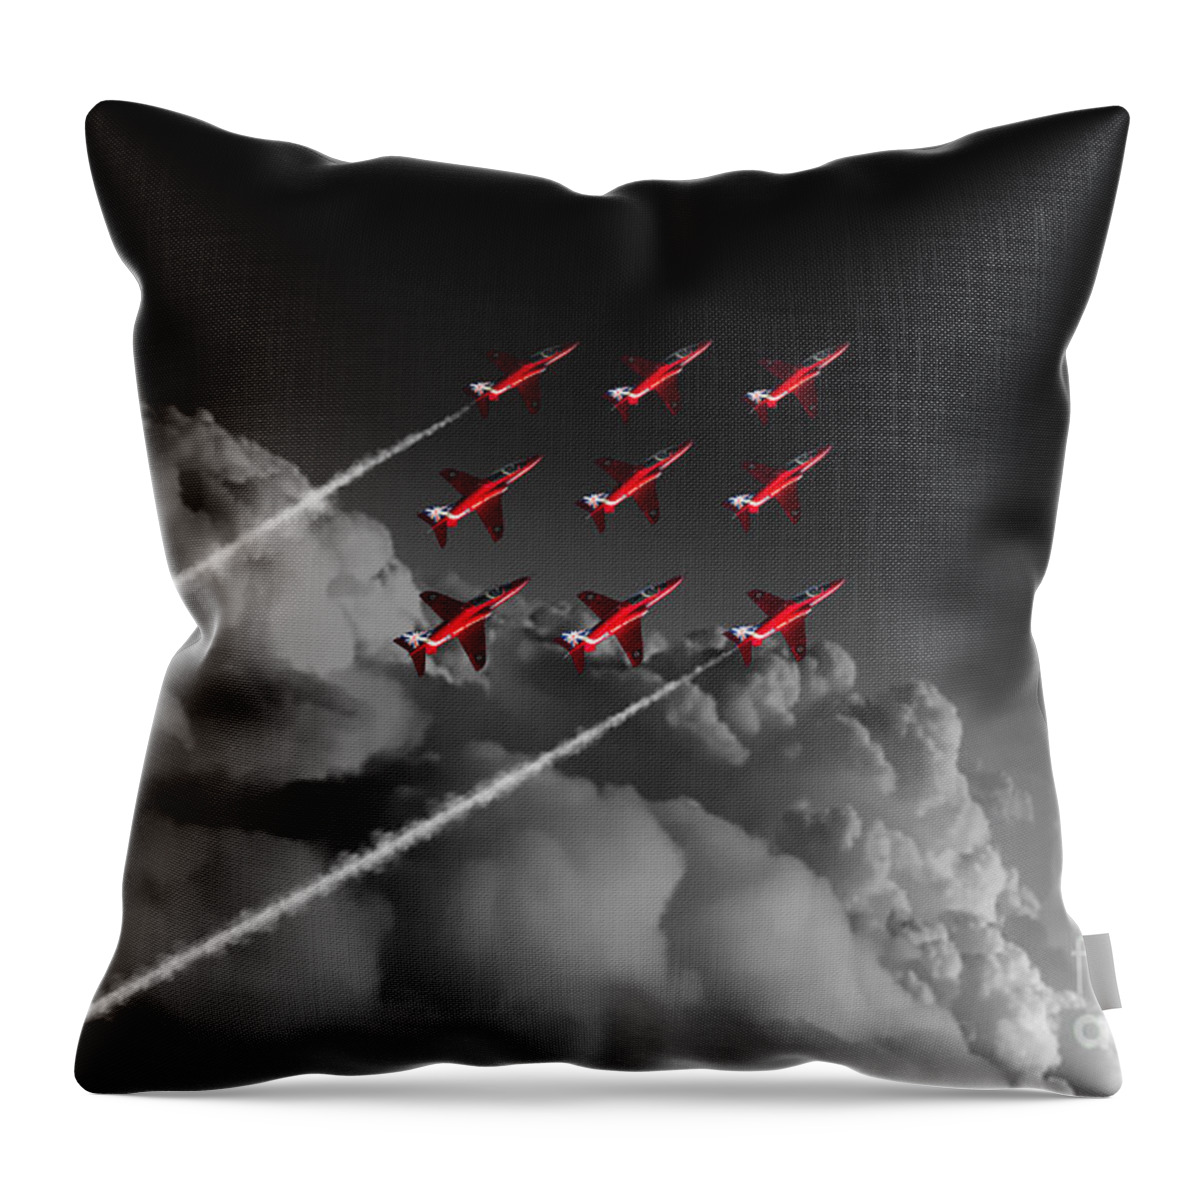 Red Throw Pillow featuring the digital art Red Arrows Diamond 9 - Pop by Airpower Art